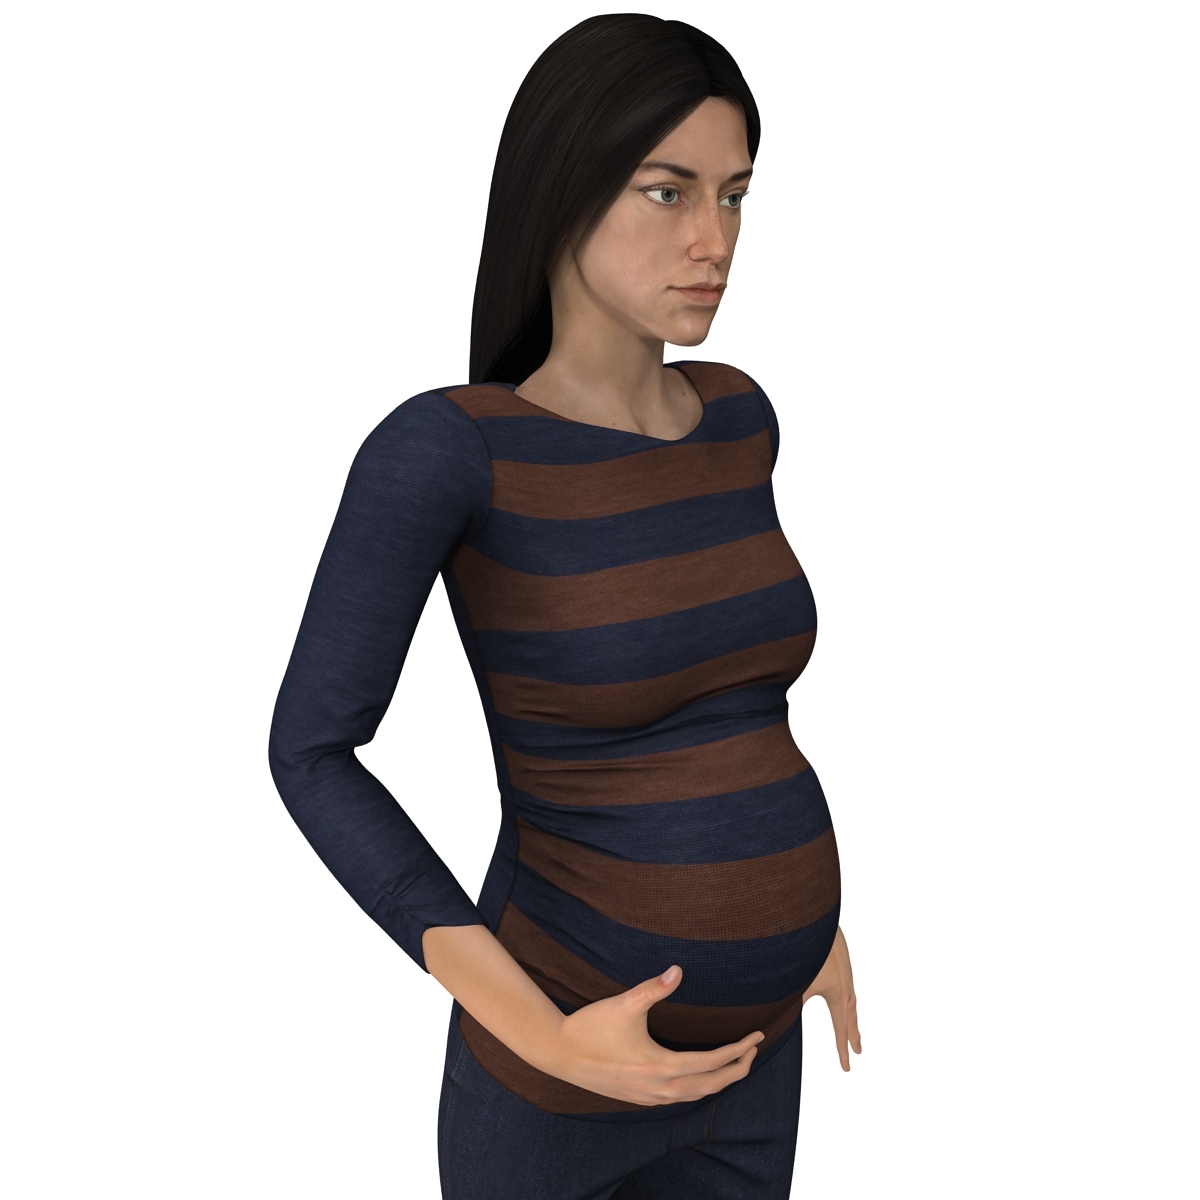 3d pregnant woman rigged model